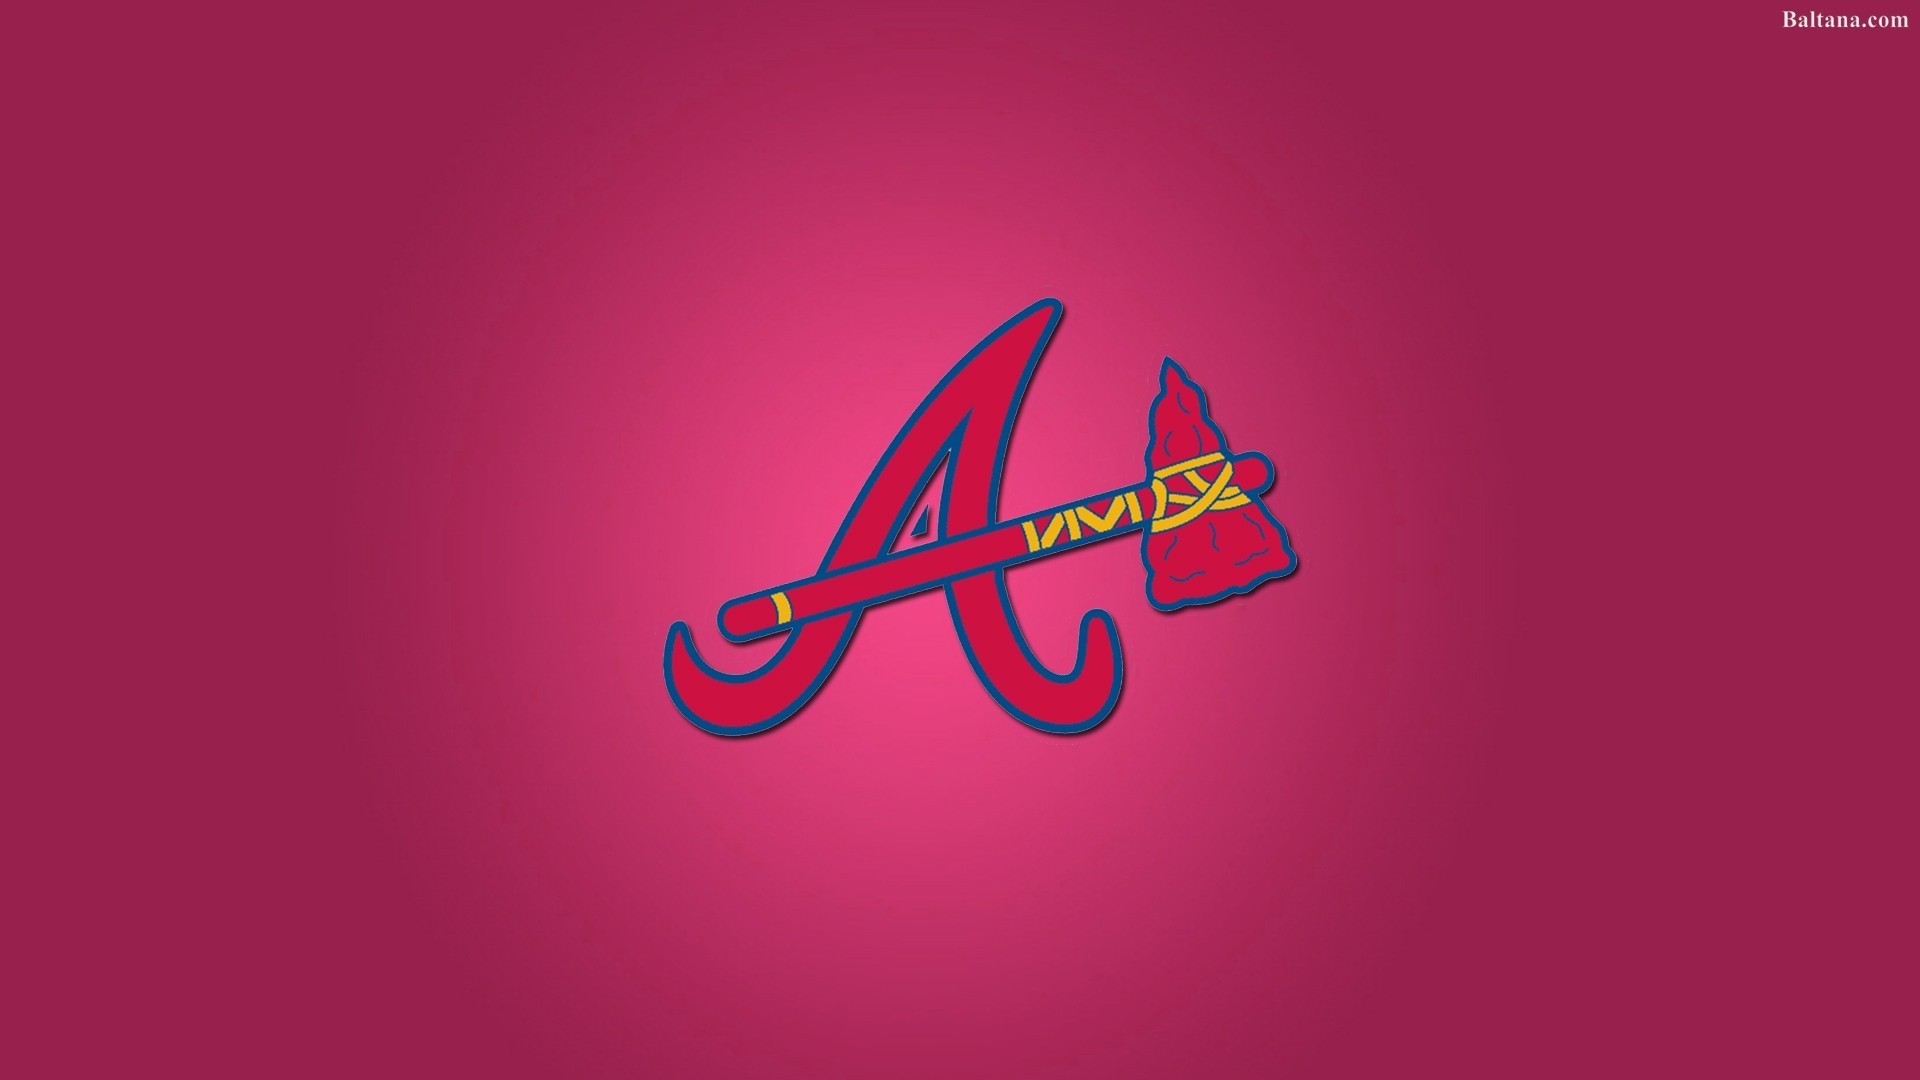 Download Atlanta Braves Wallpapers For Iphone, Desktop, - Atlanta Braves Wallpaper Women - HD Wallpaper 